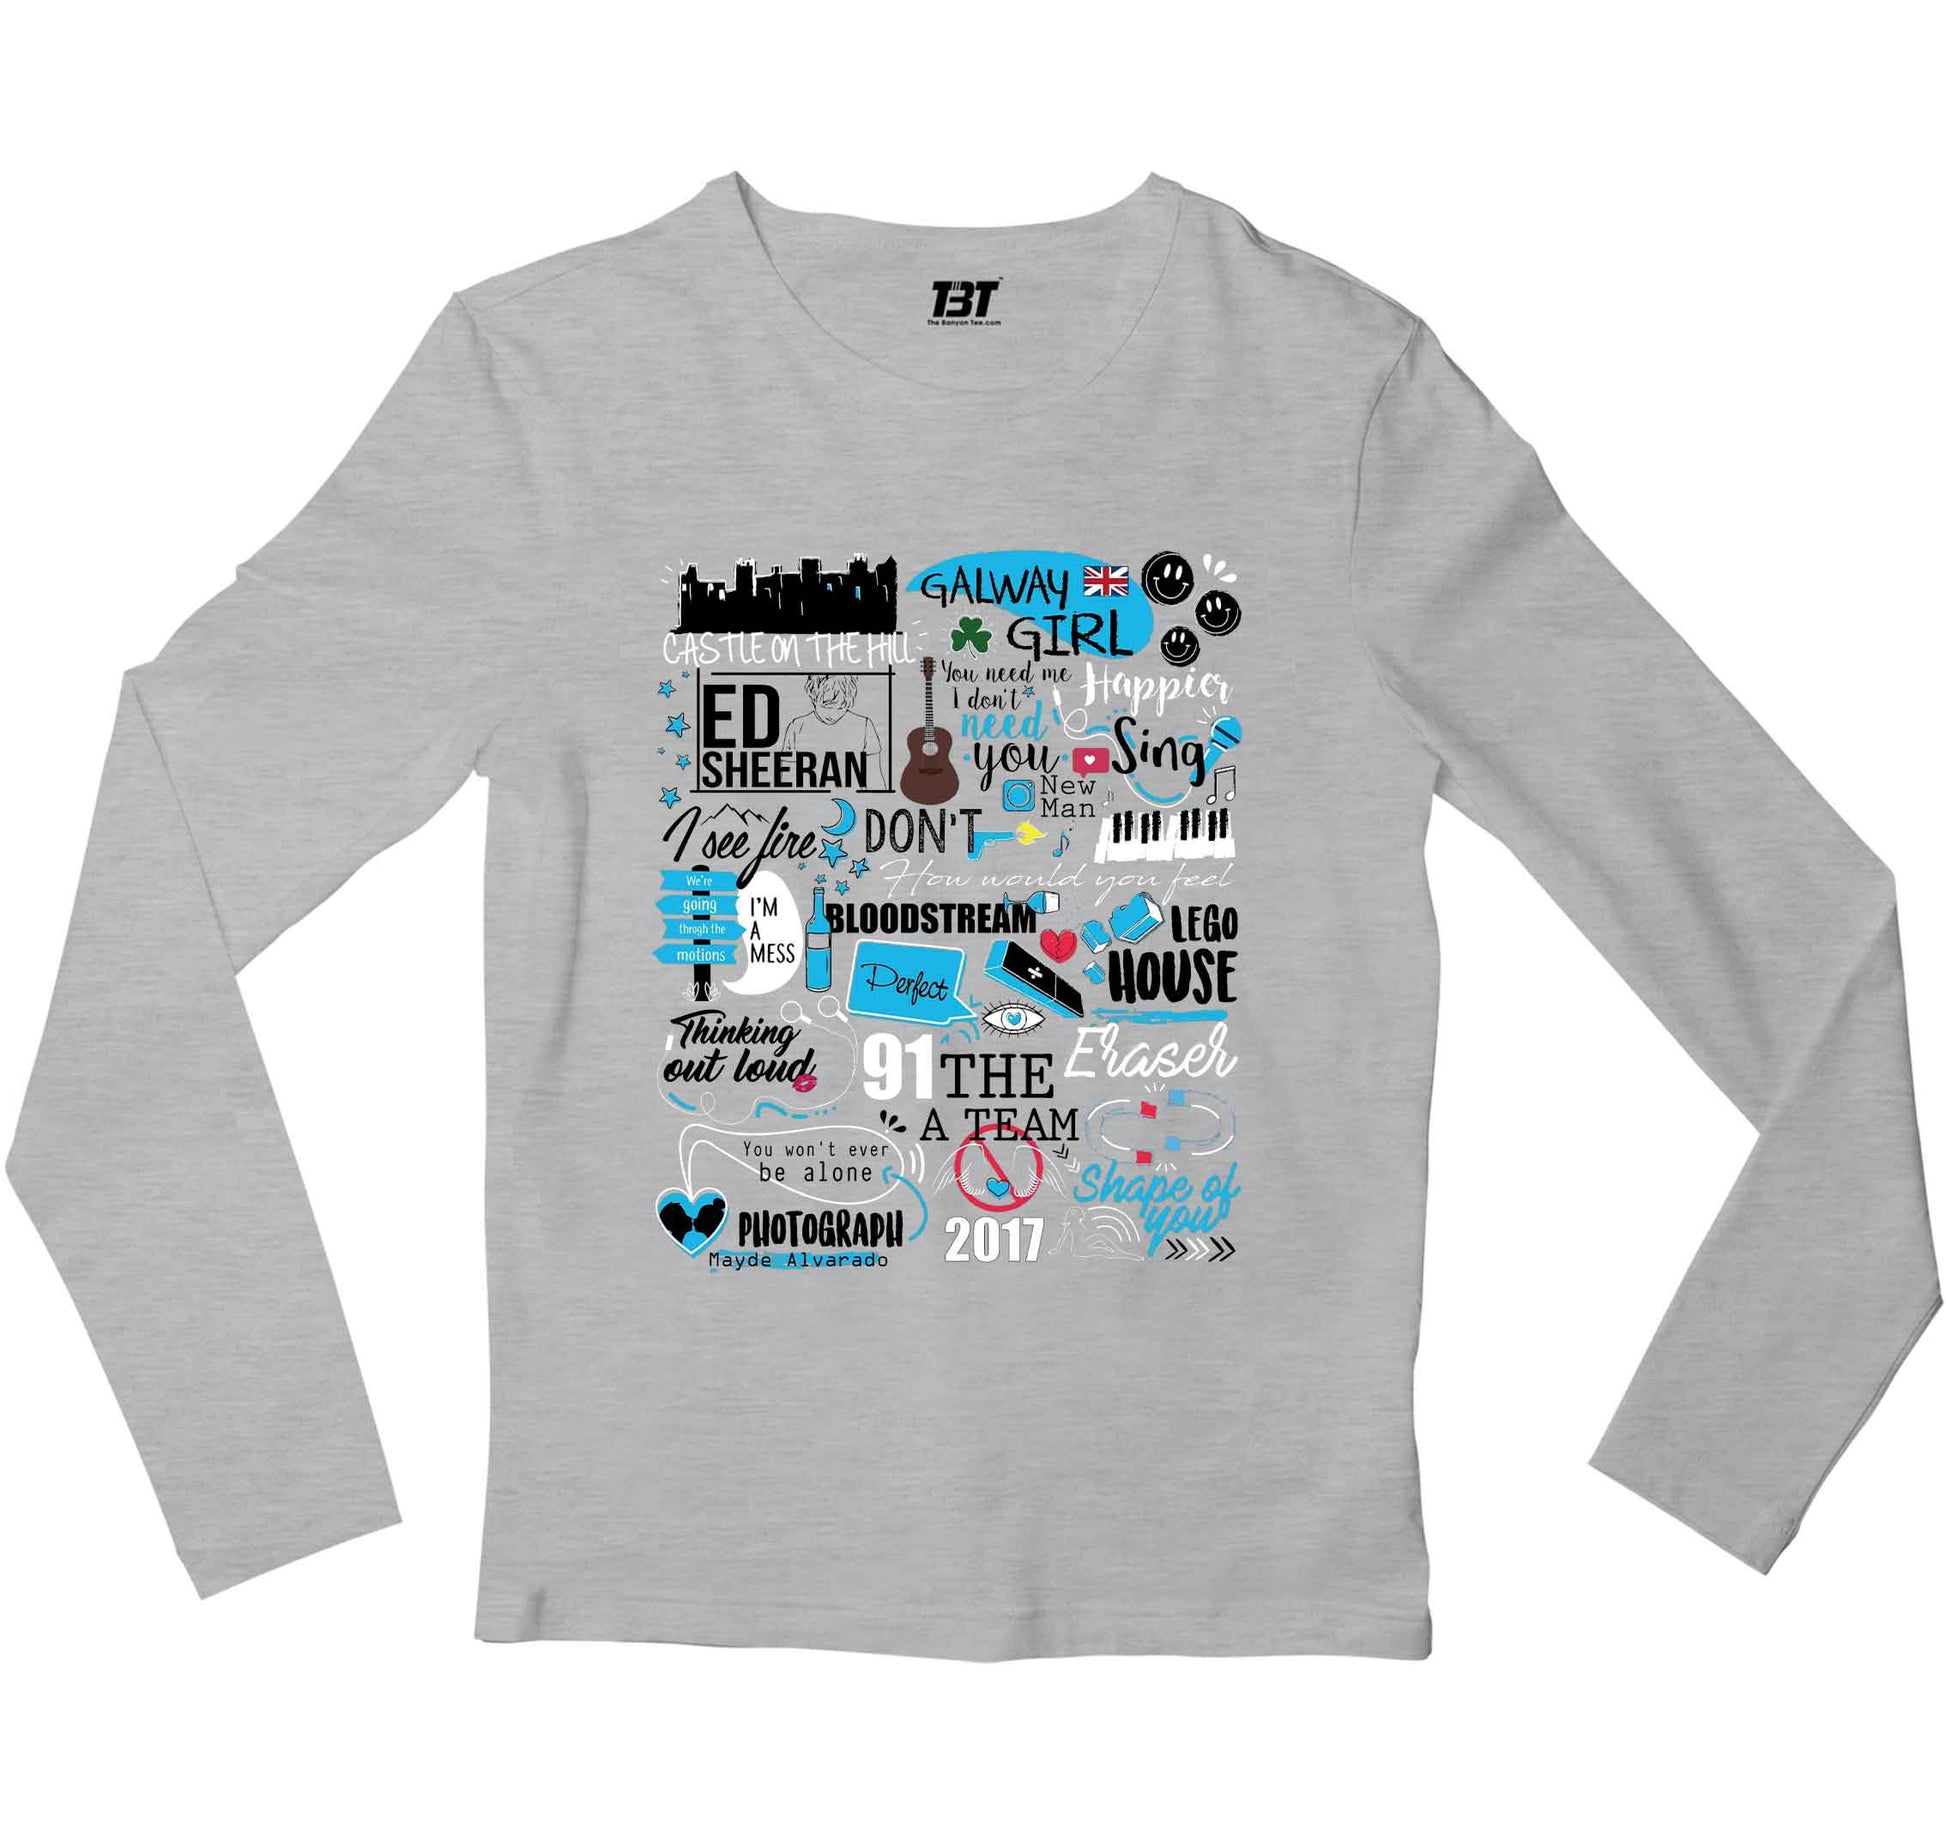 the banyan tee merch on sale Ed Sheeran Full Sleeve - On Sale - M (Chest size 40 IN)